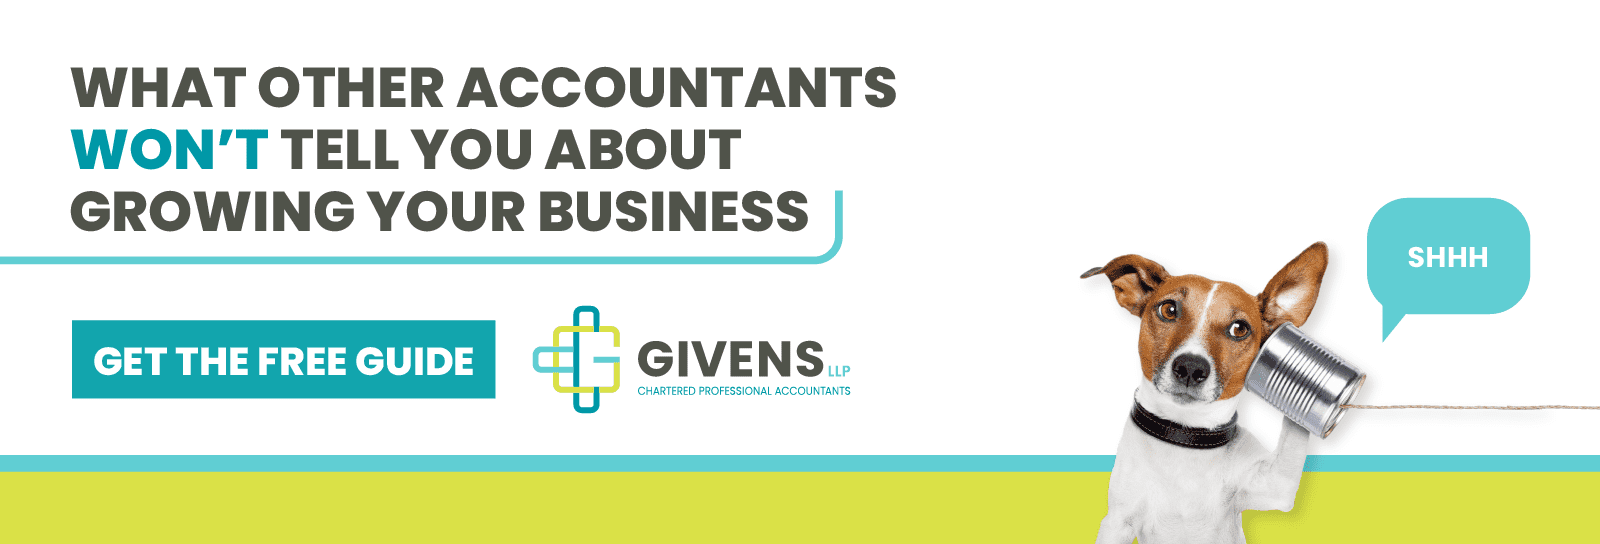 A small dog with a brown face and white body holds a tin can on a string up to its ear. A speech bubble above the can says, "Shhh." To the left of the dog are the words, "What other accountants won't tell you about growing your business. Get the Free Guide."